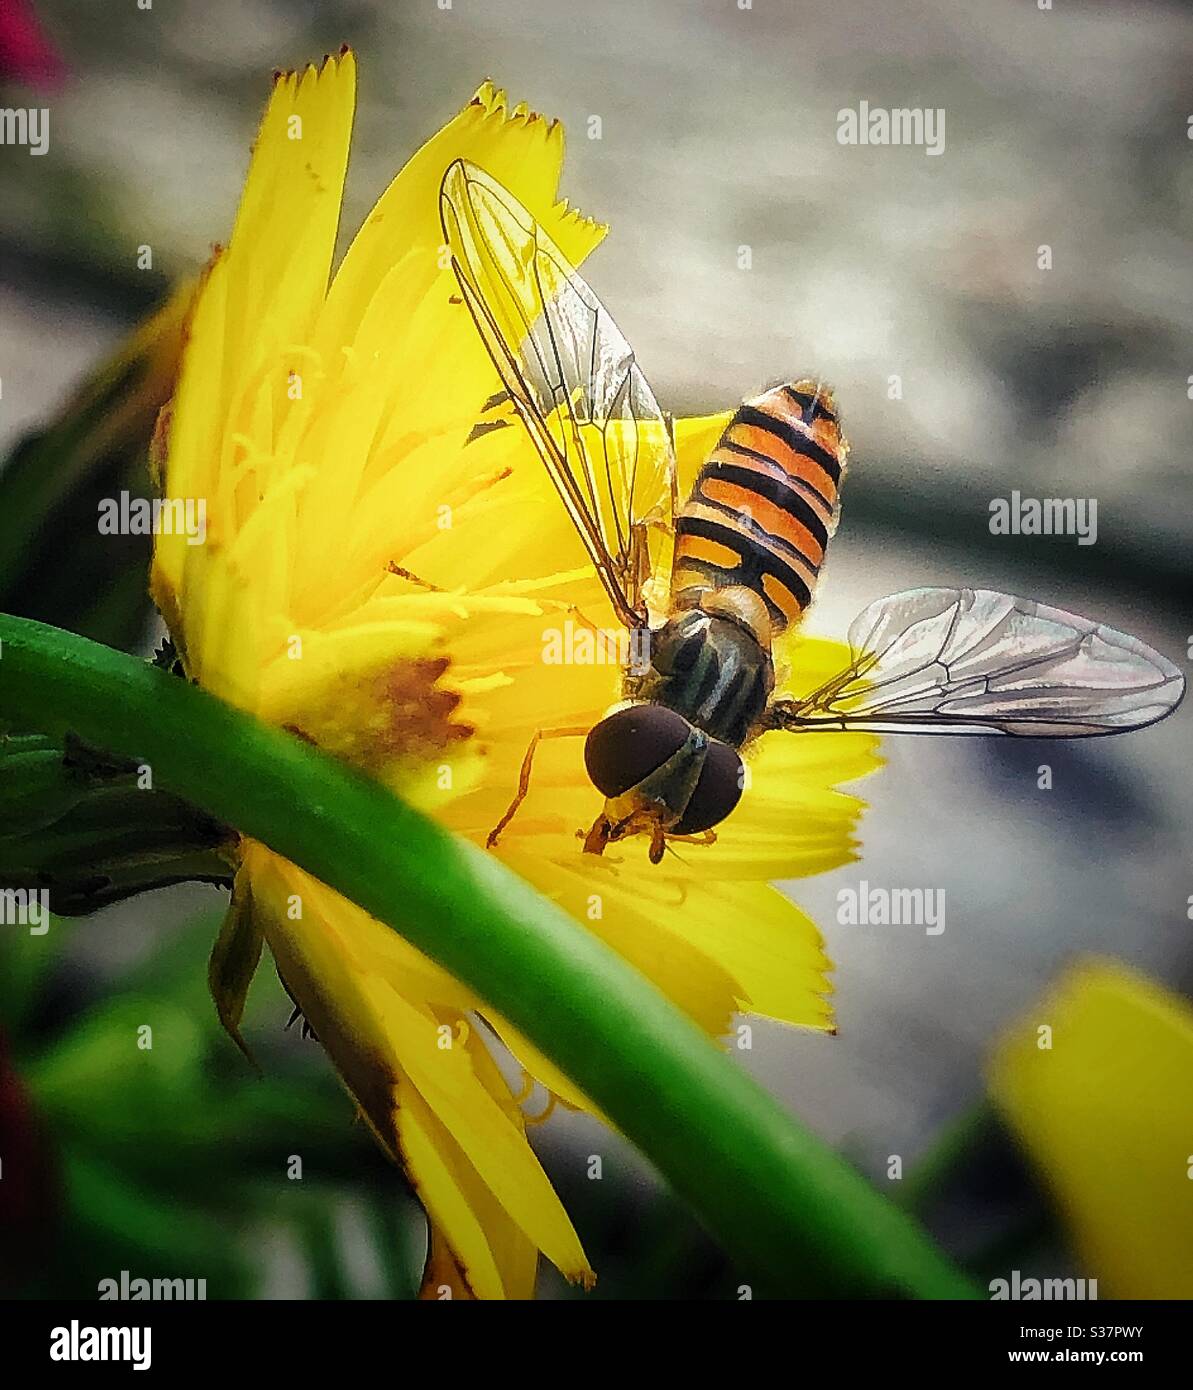 Hoverfly on a flower. Stock Photo